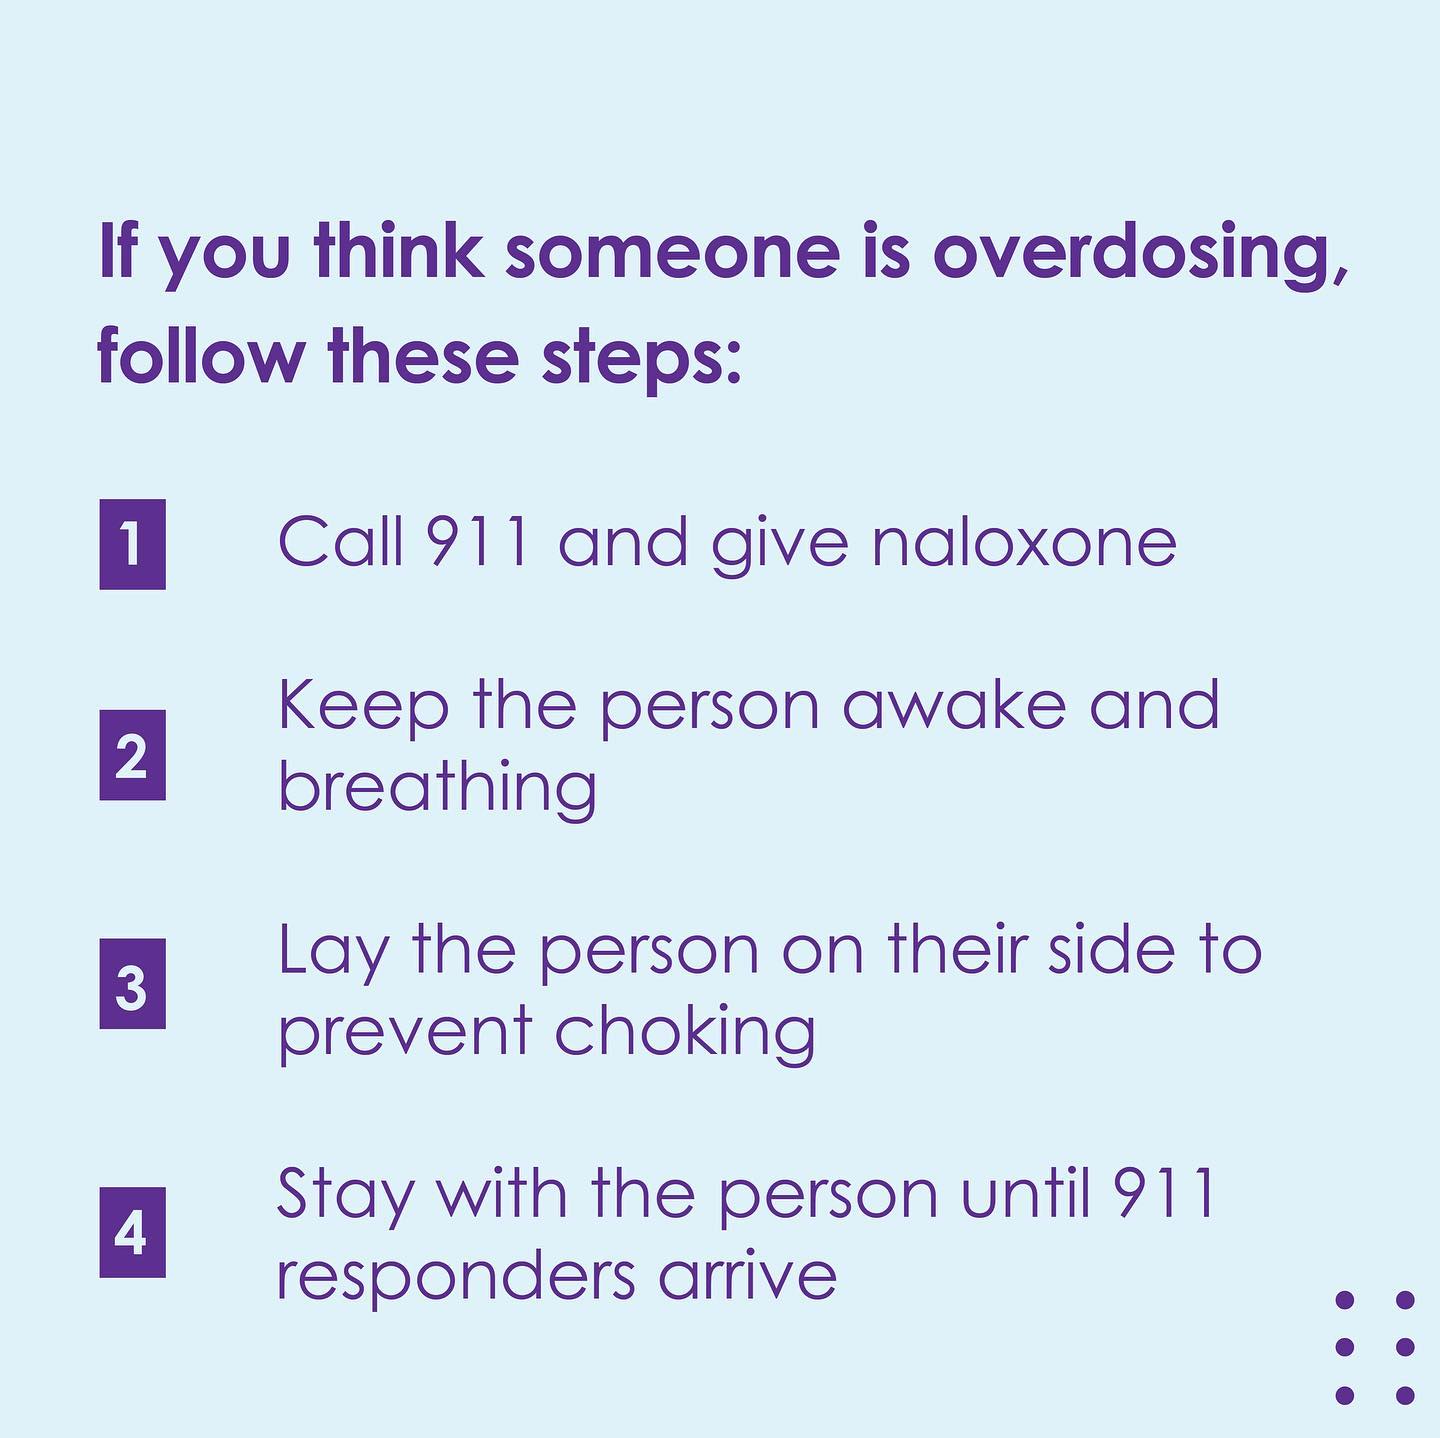 If you think someone is overdosing